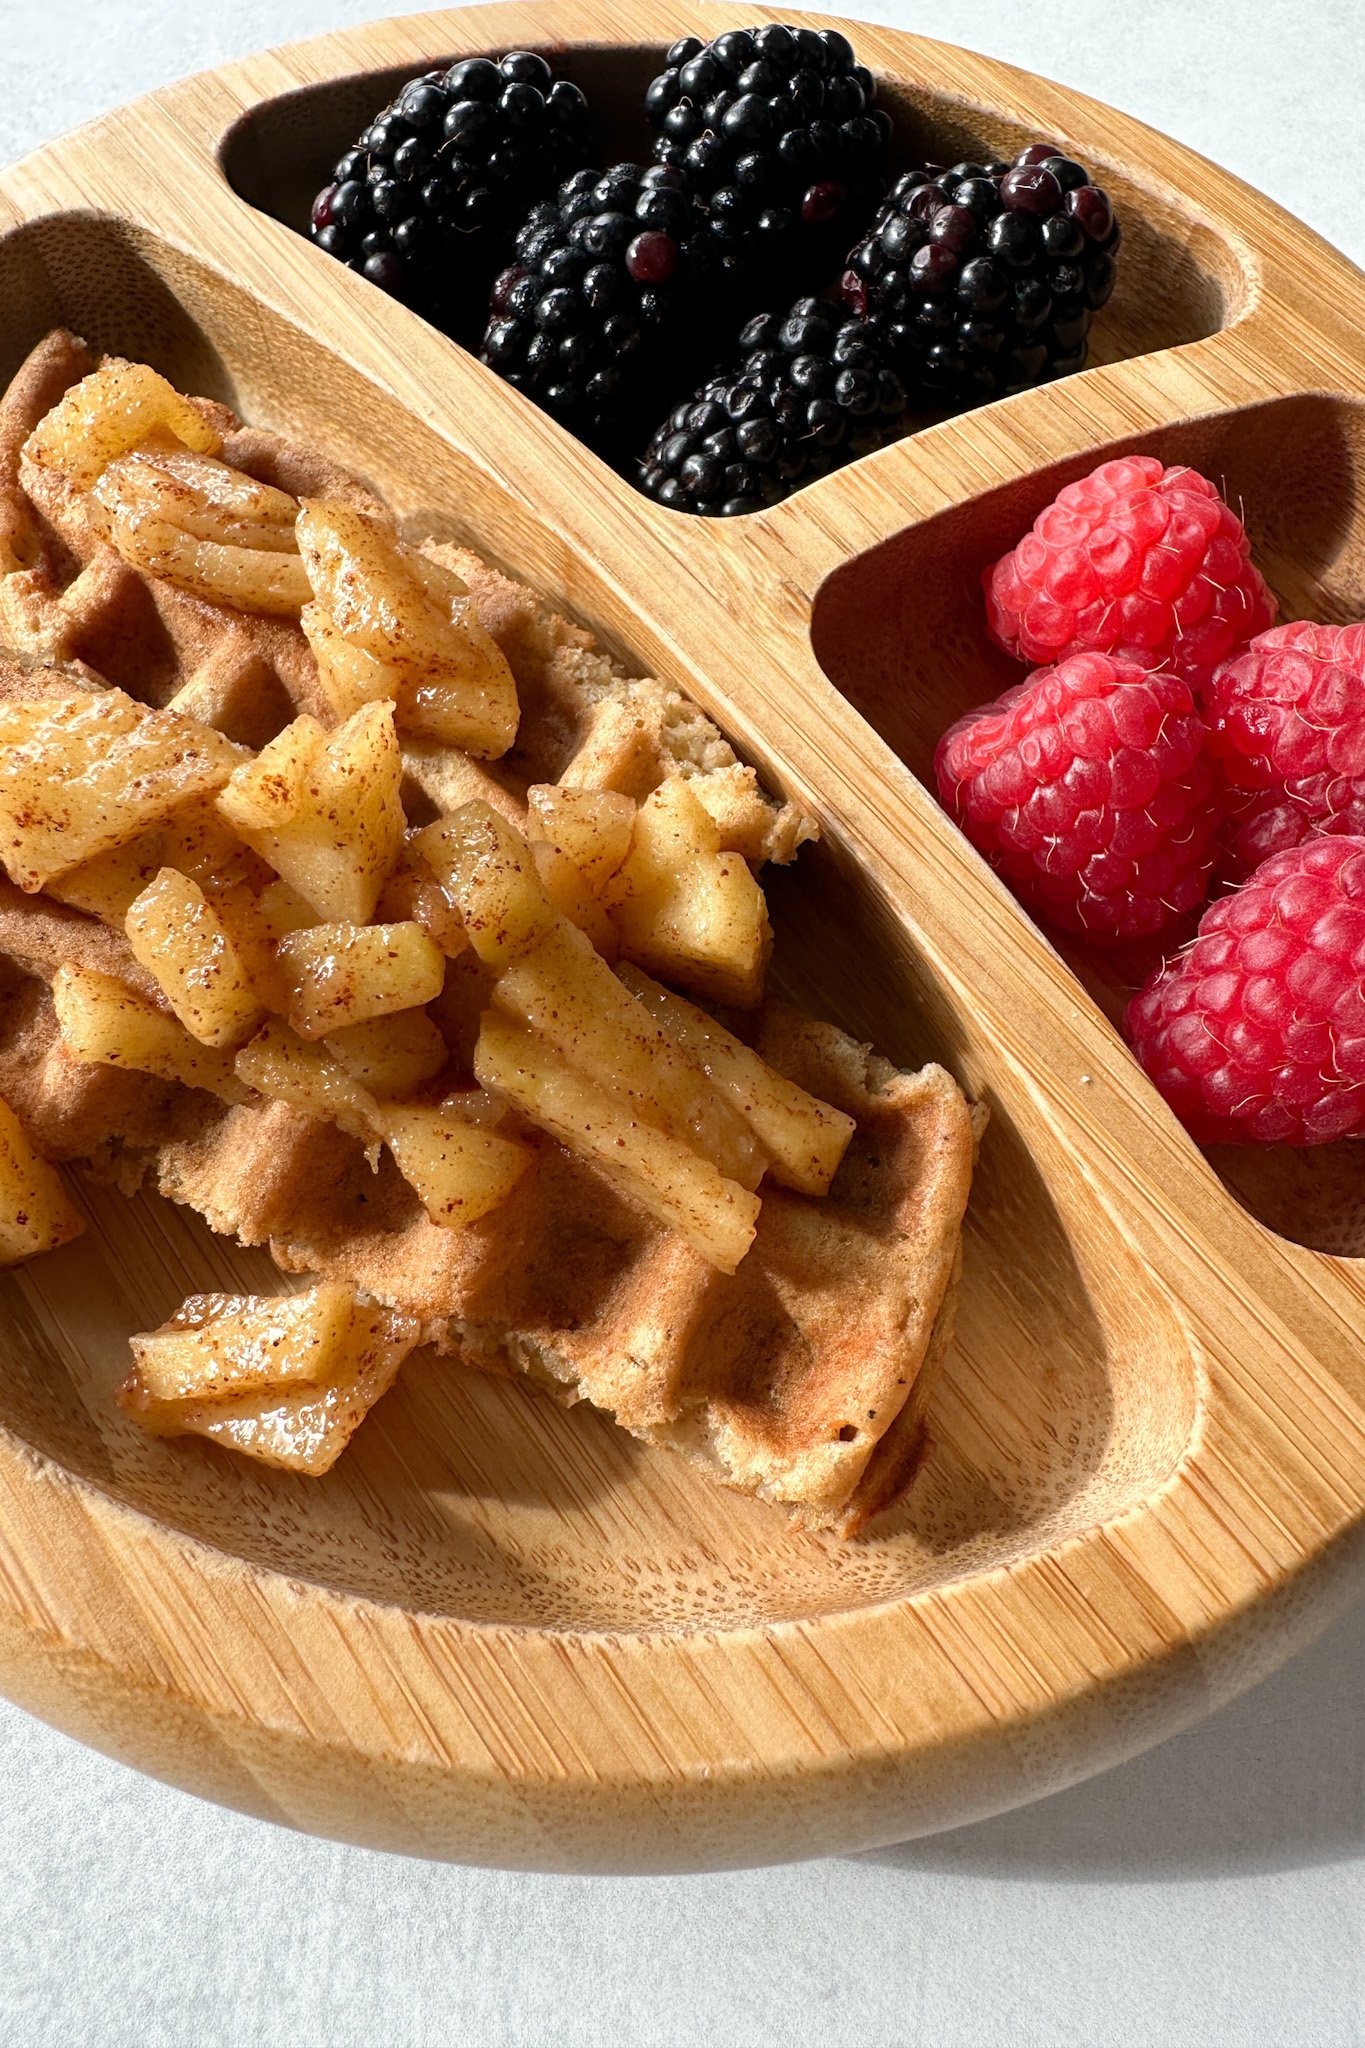 Cinnamon apple waffles topped with cinnamon apples.